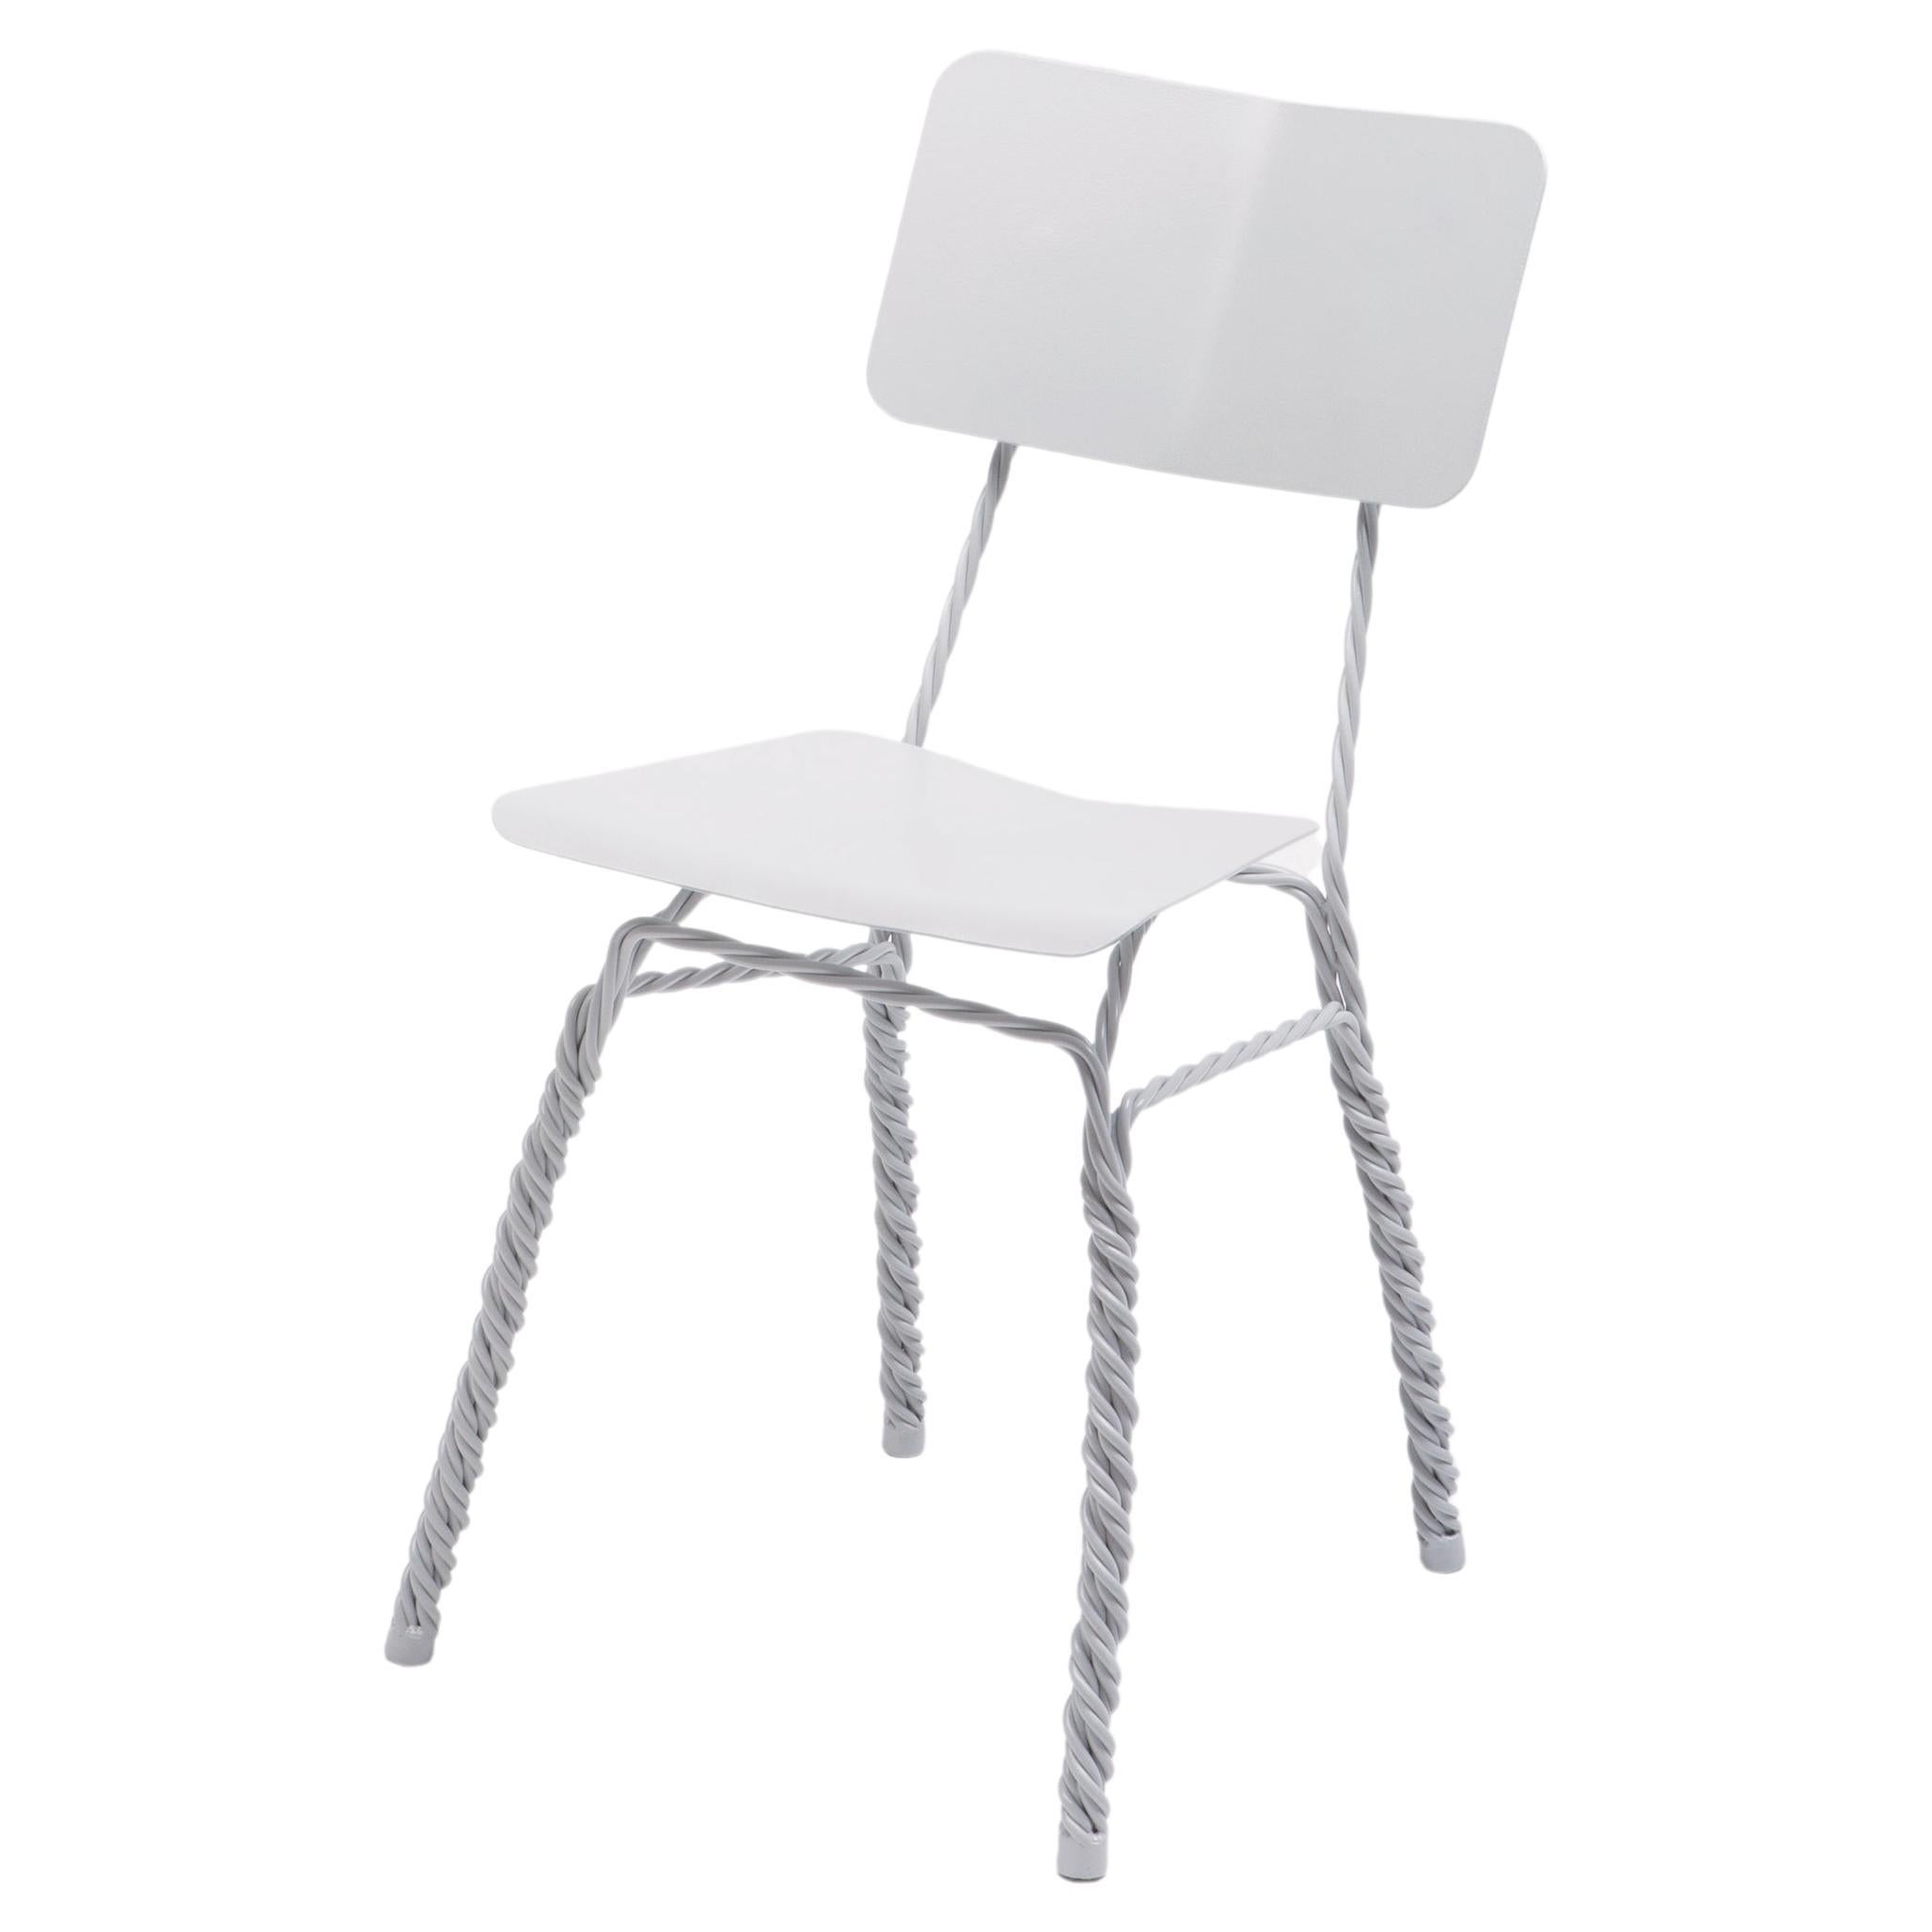 Dutch Contemporary White Steel Twisted Arm Chair by by Ward Wijnant For Sale